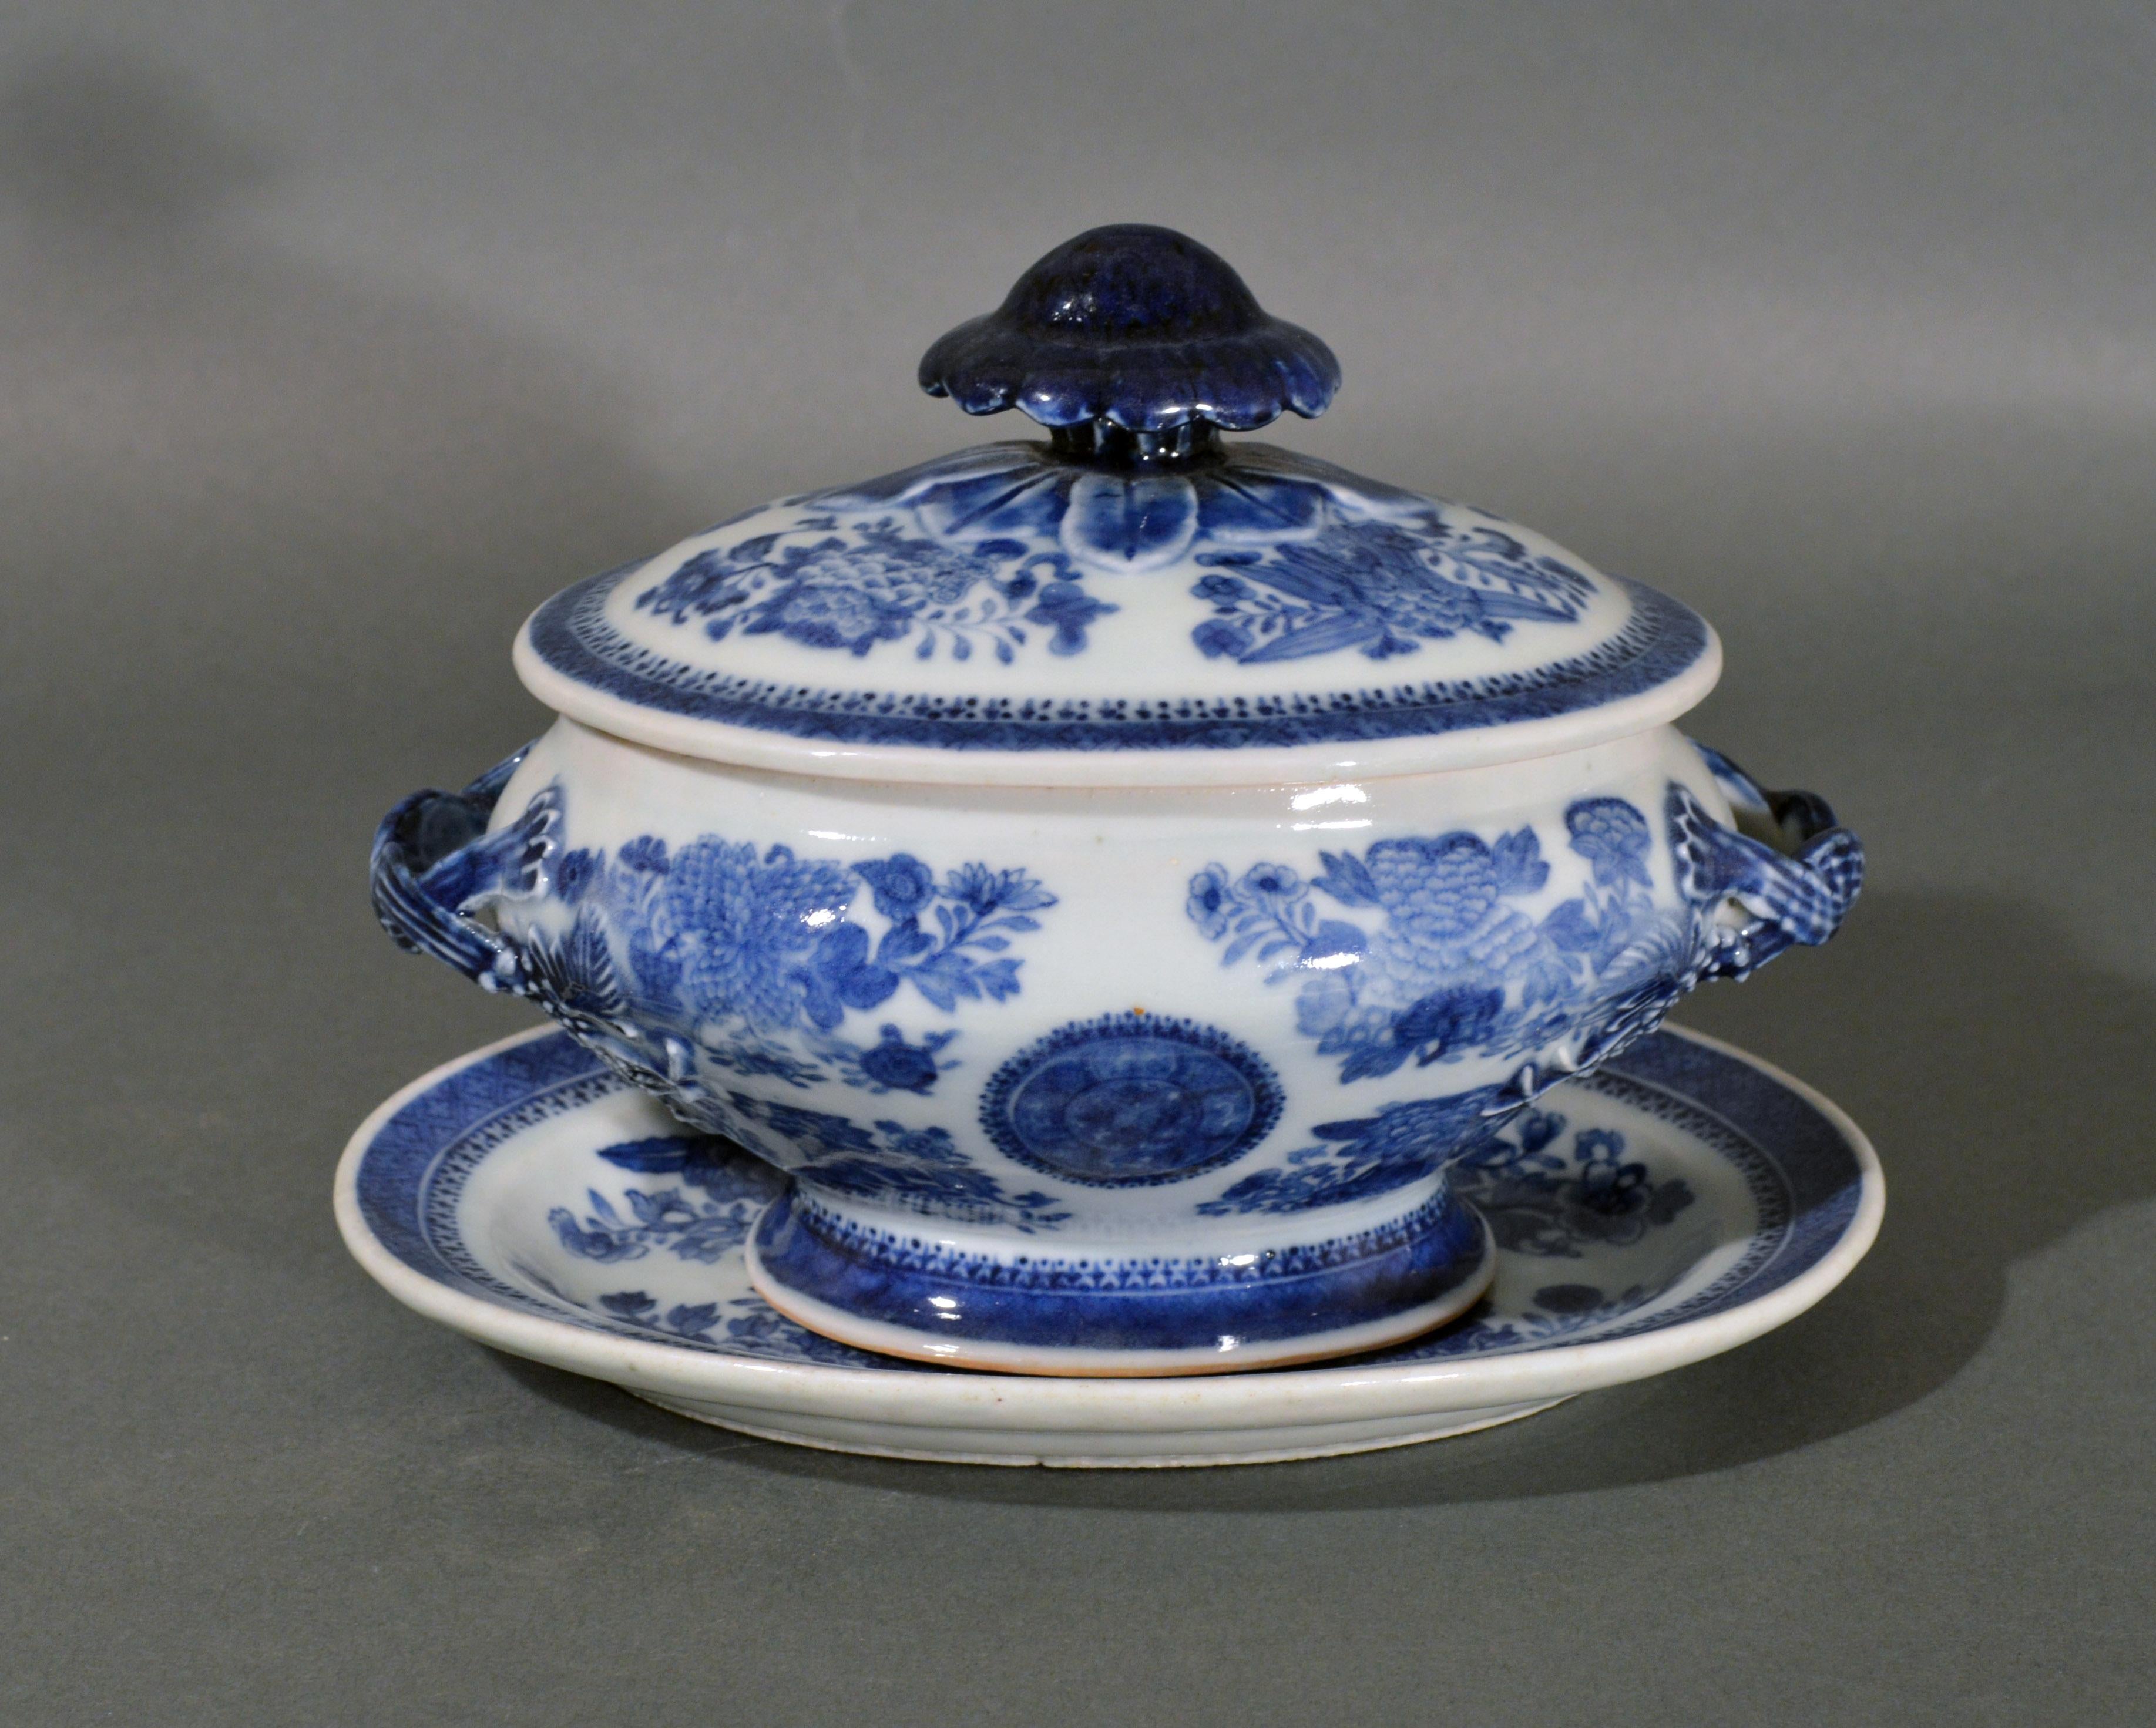 Chinese Export Porcelain Blue Fitzhugh Sauce Tureens, Covers & Stands For Sale 6